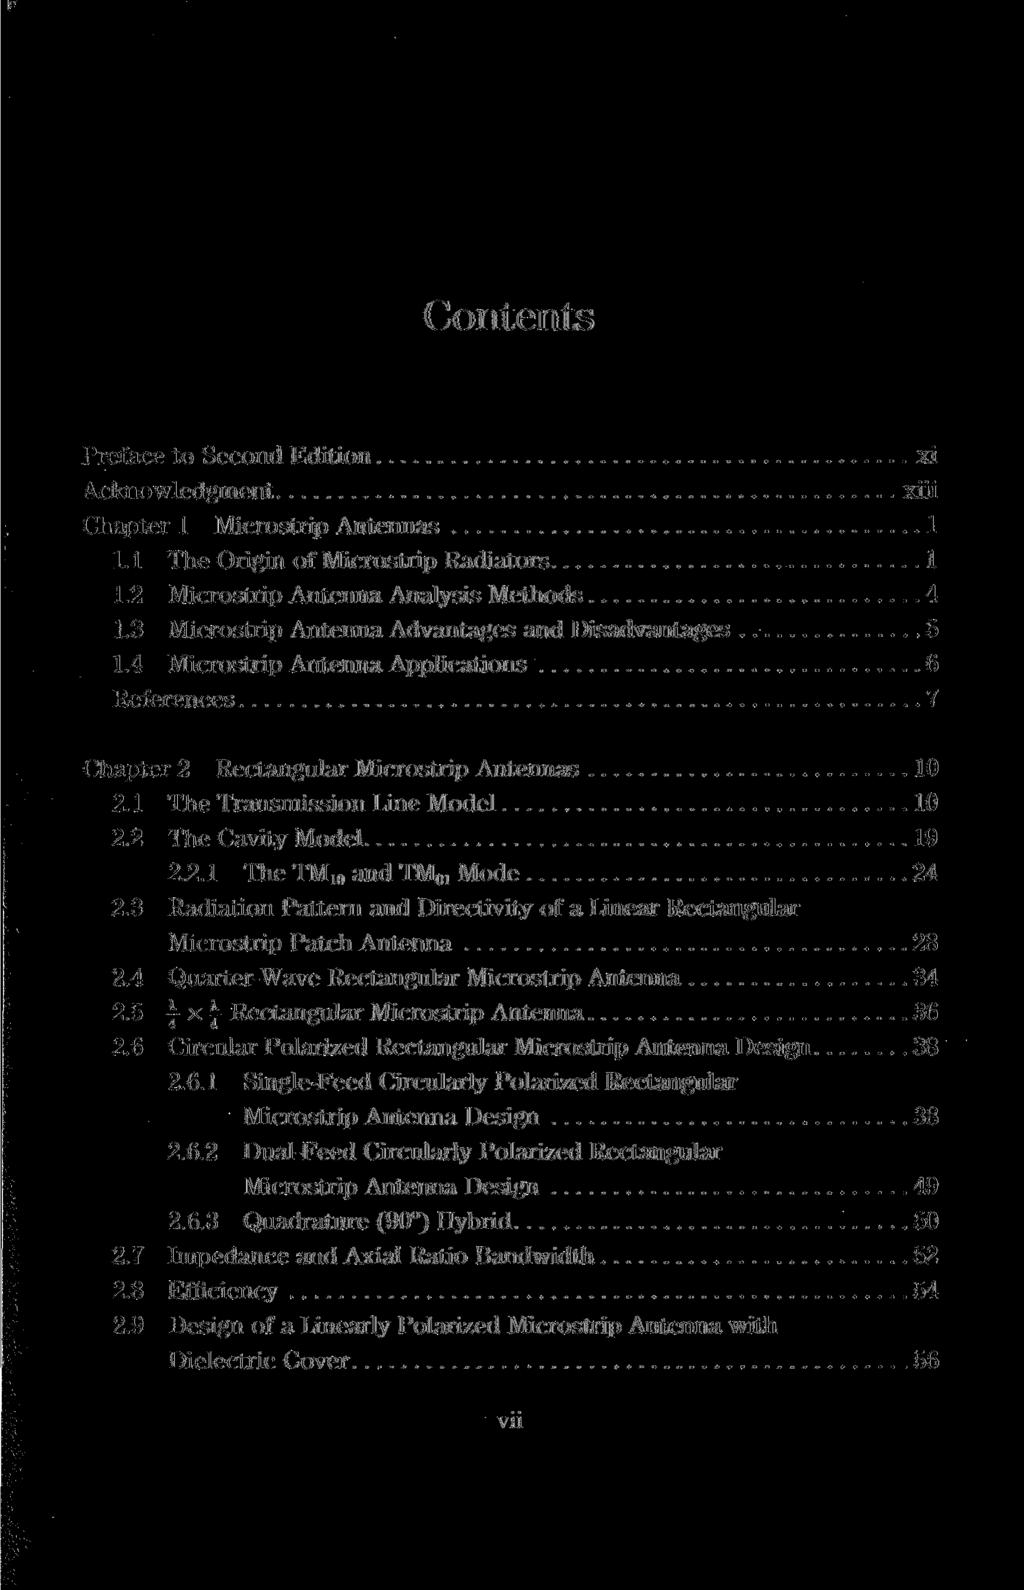 Preface to Second Edition xi Acknowledgment xiii Chapter 1 Microstrip Antennas 1 1.1 The Origin of Microstrip Radiators 1 1.2 Microstrip Antenna Analysis Methods 4 1.